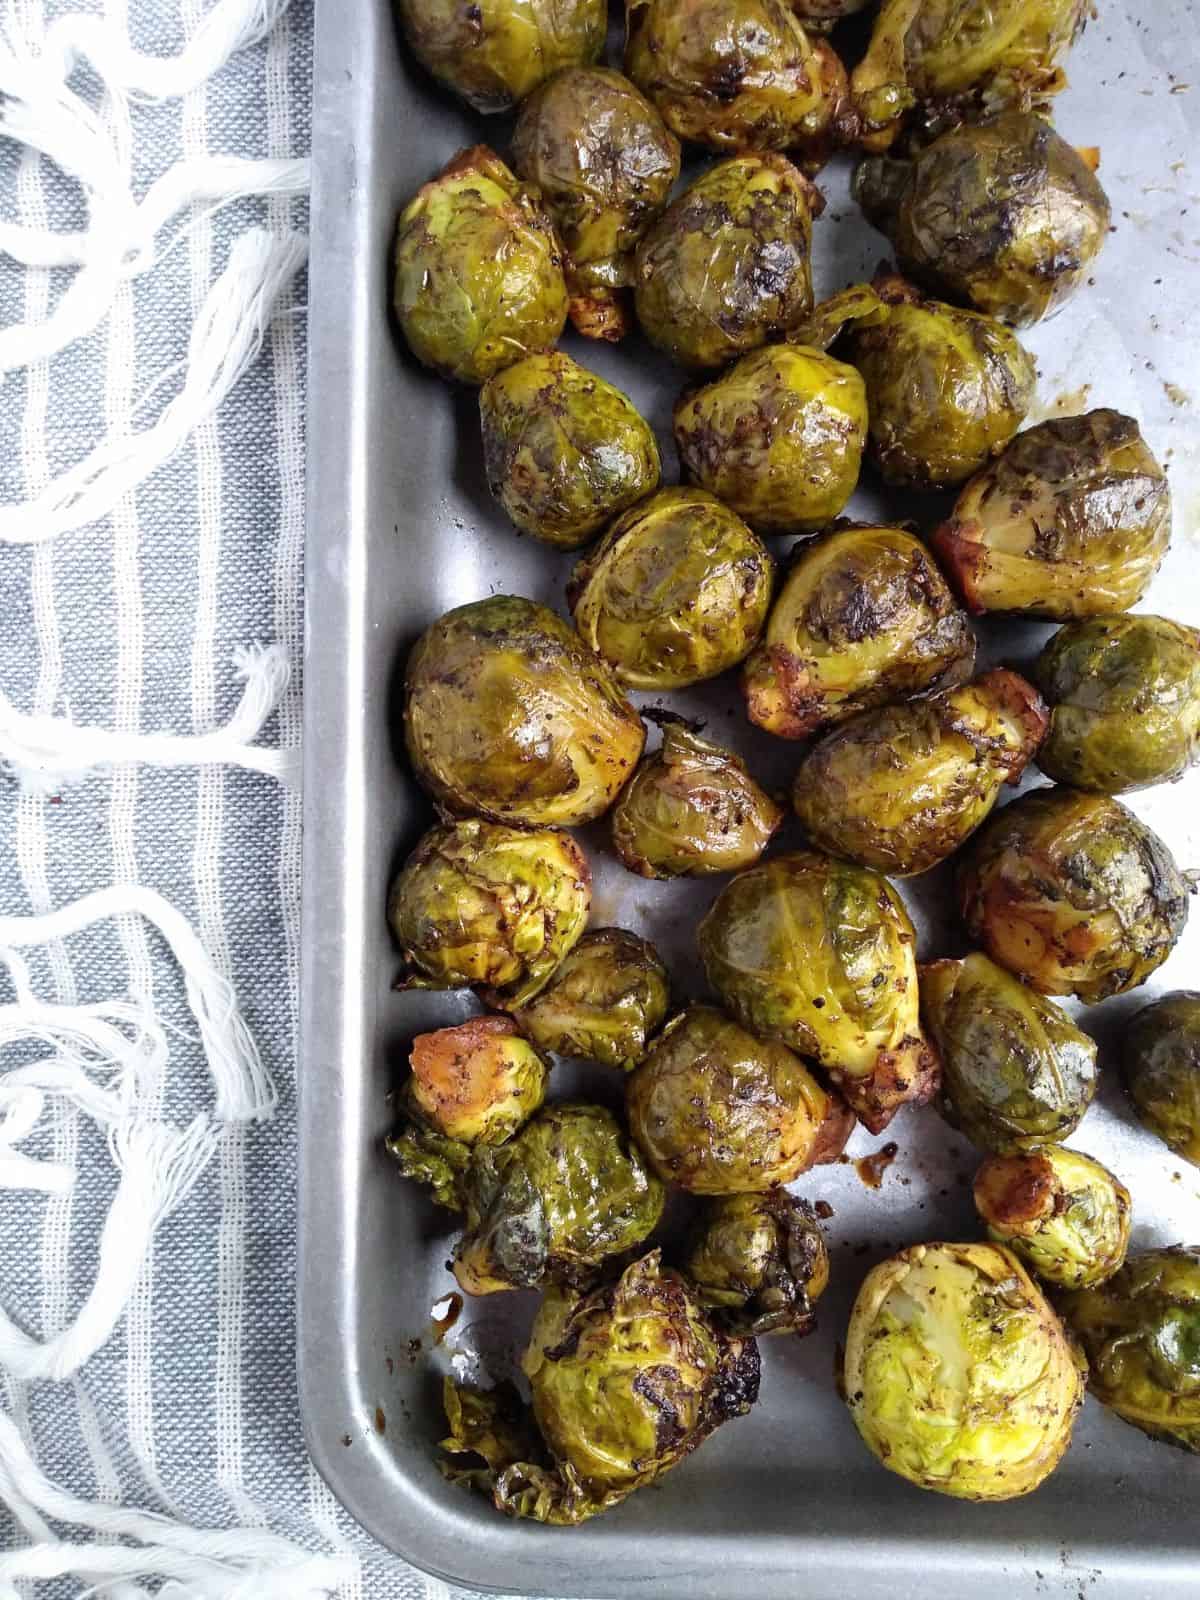 Whole sous vide brussels sprouts that have been browned in the oven on a metal sheet pan with a gray and white strip towel under the pan. 